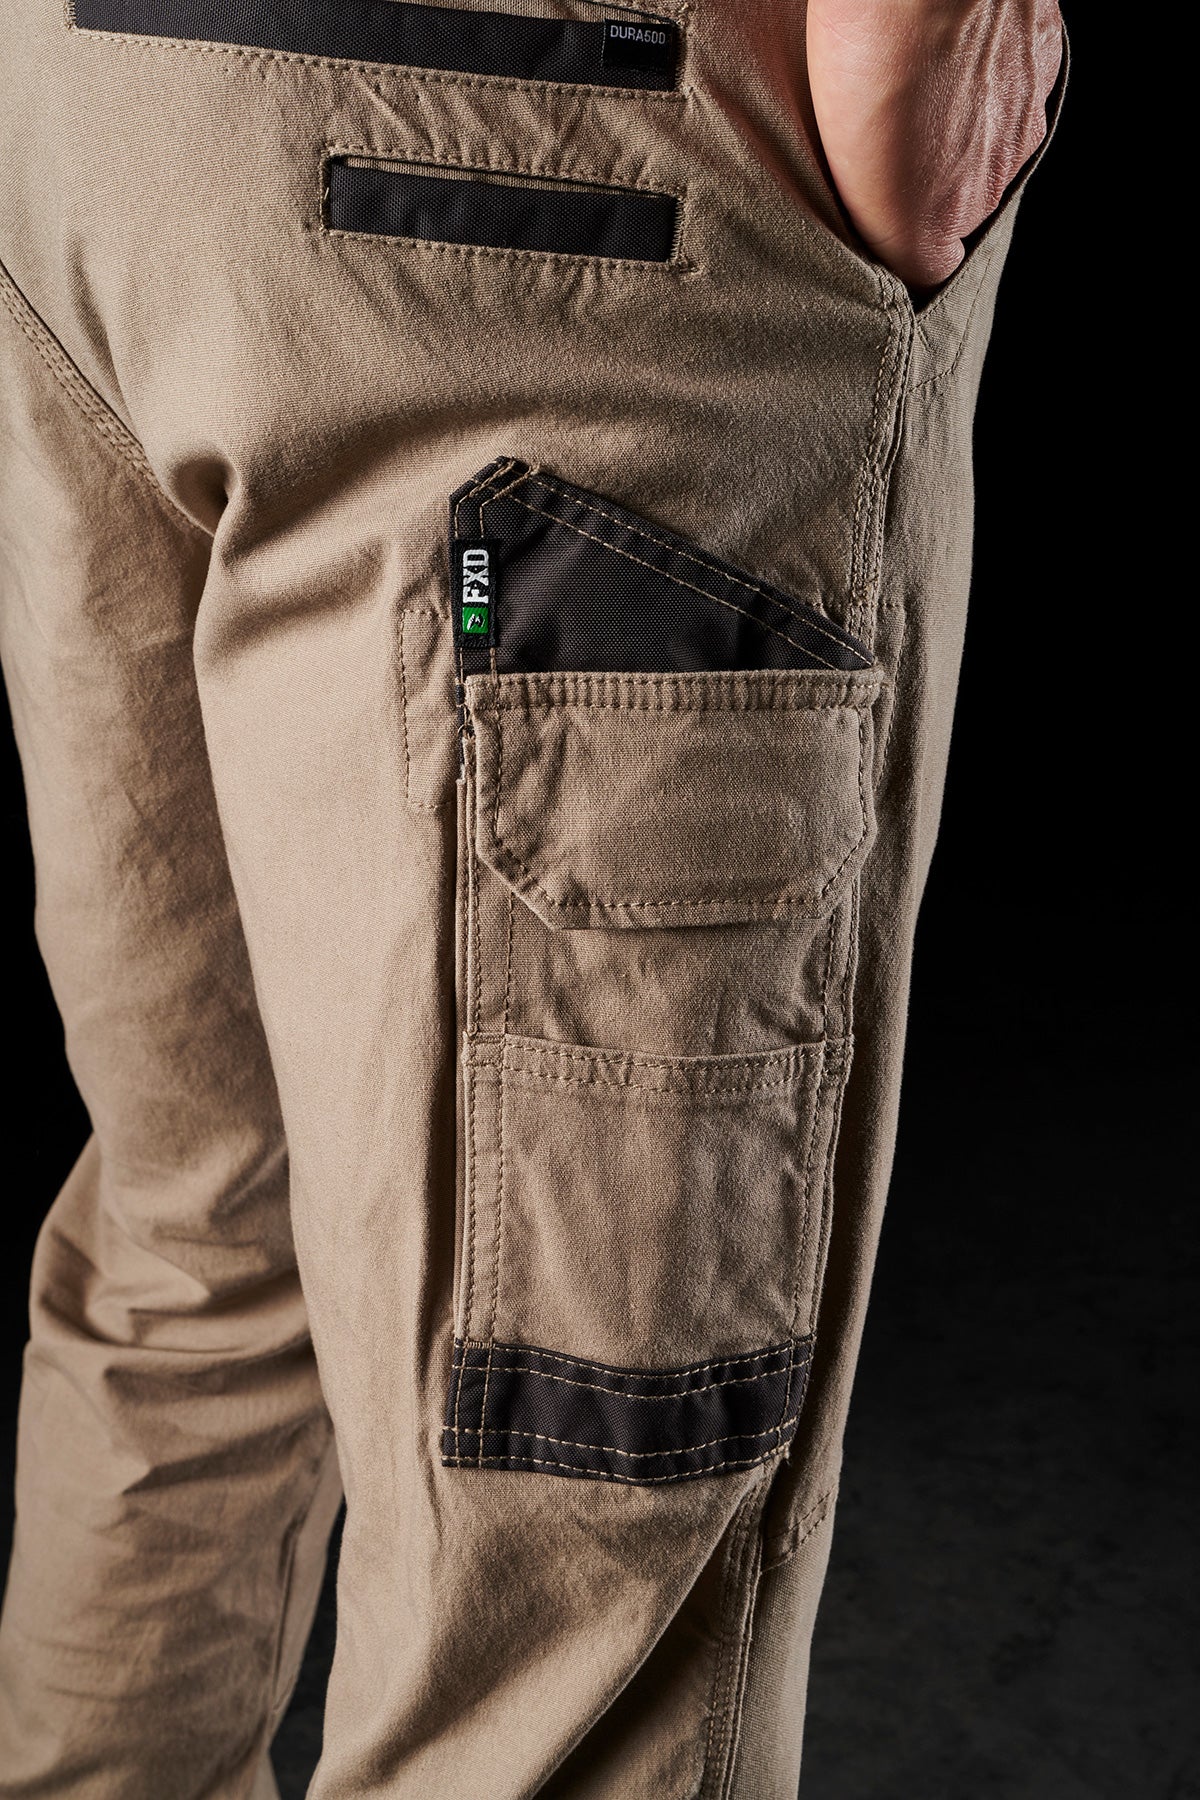 FXD WP-3 Stretch Work Pants